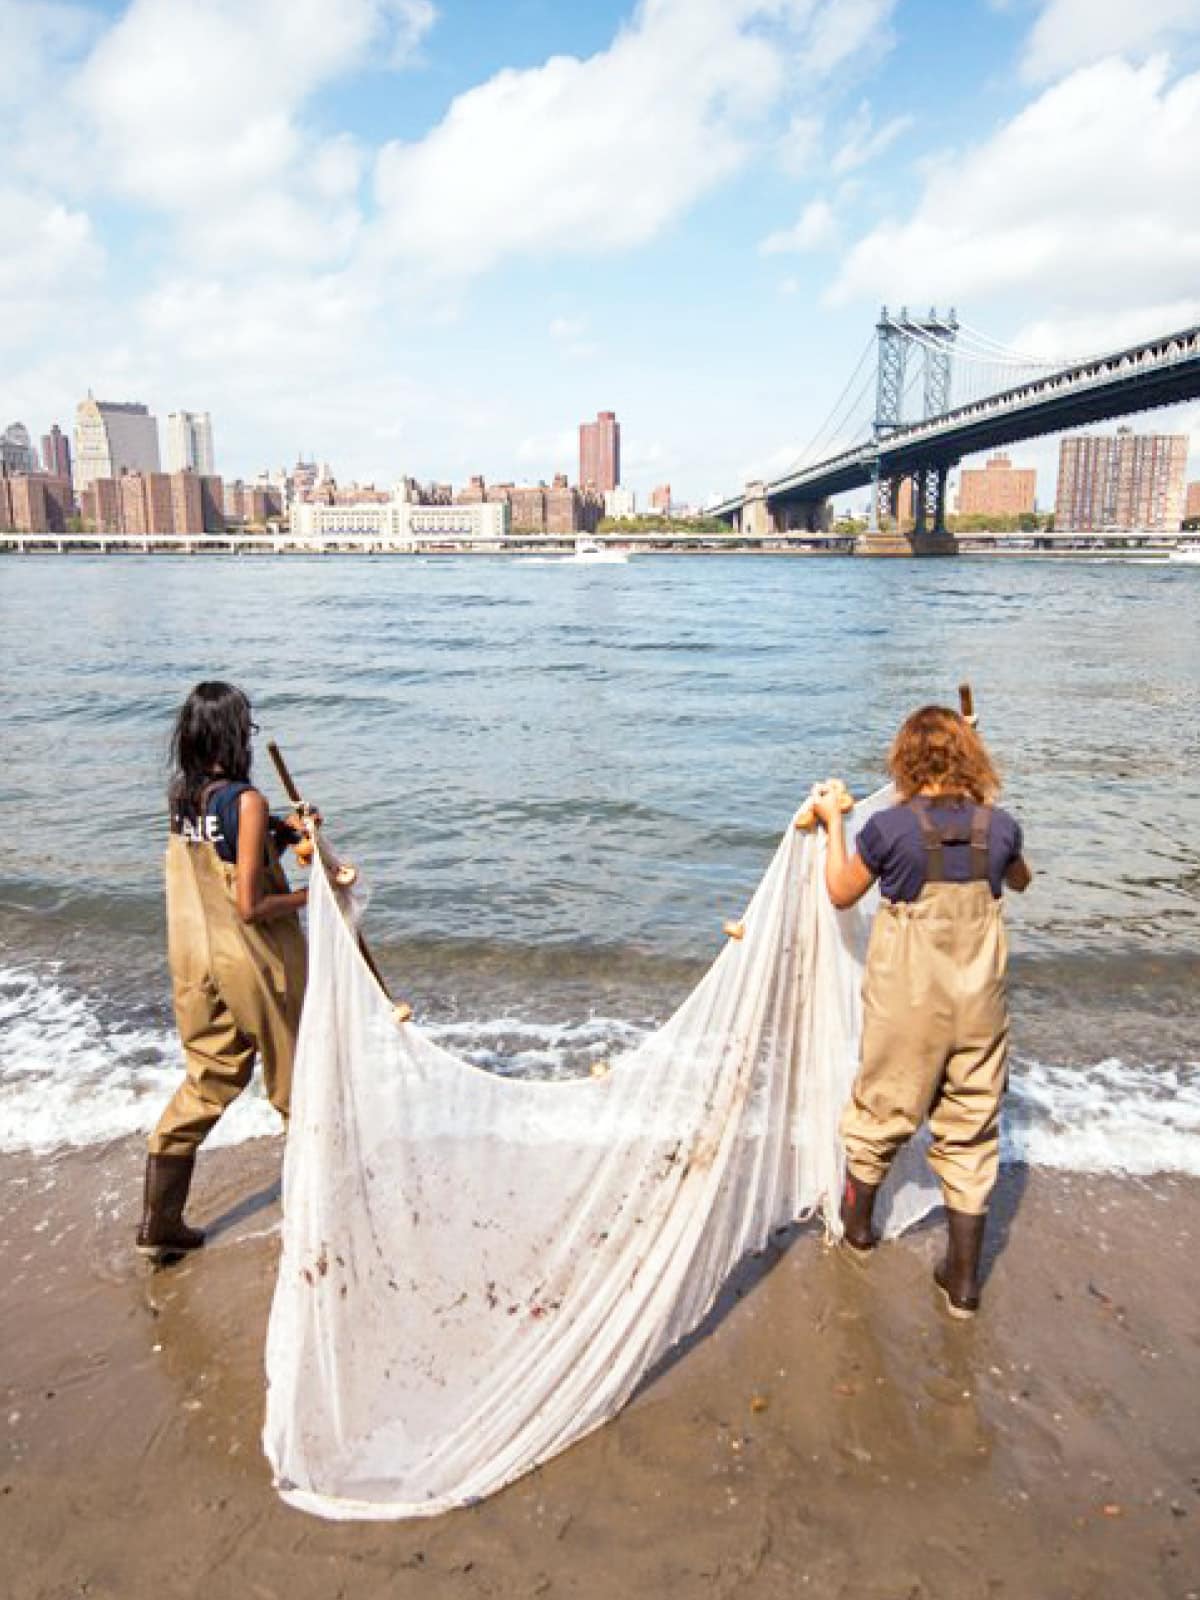 Two women in fishing waders walking into the water with a large net for seine fishing on a sunny day. Lower Manhattan is seen in the distance.